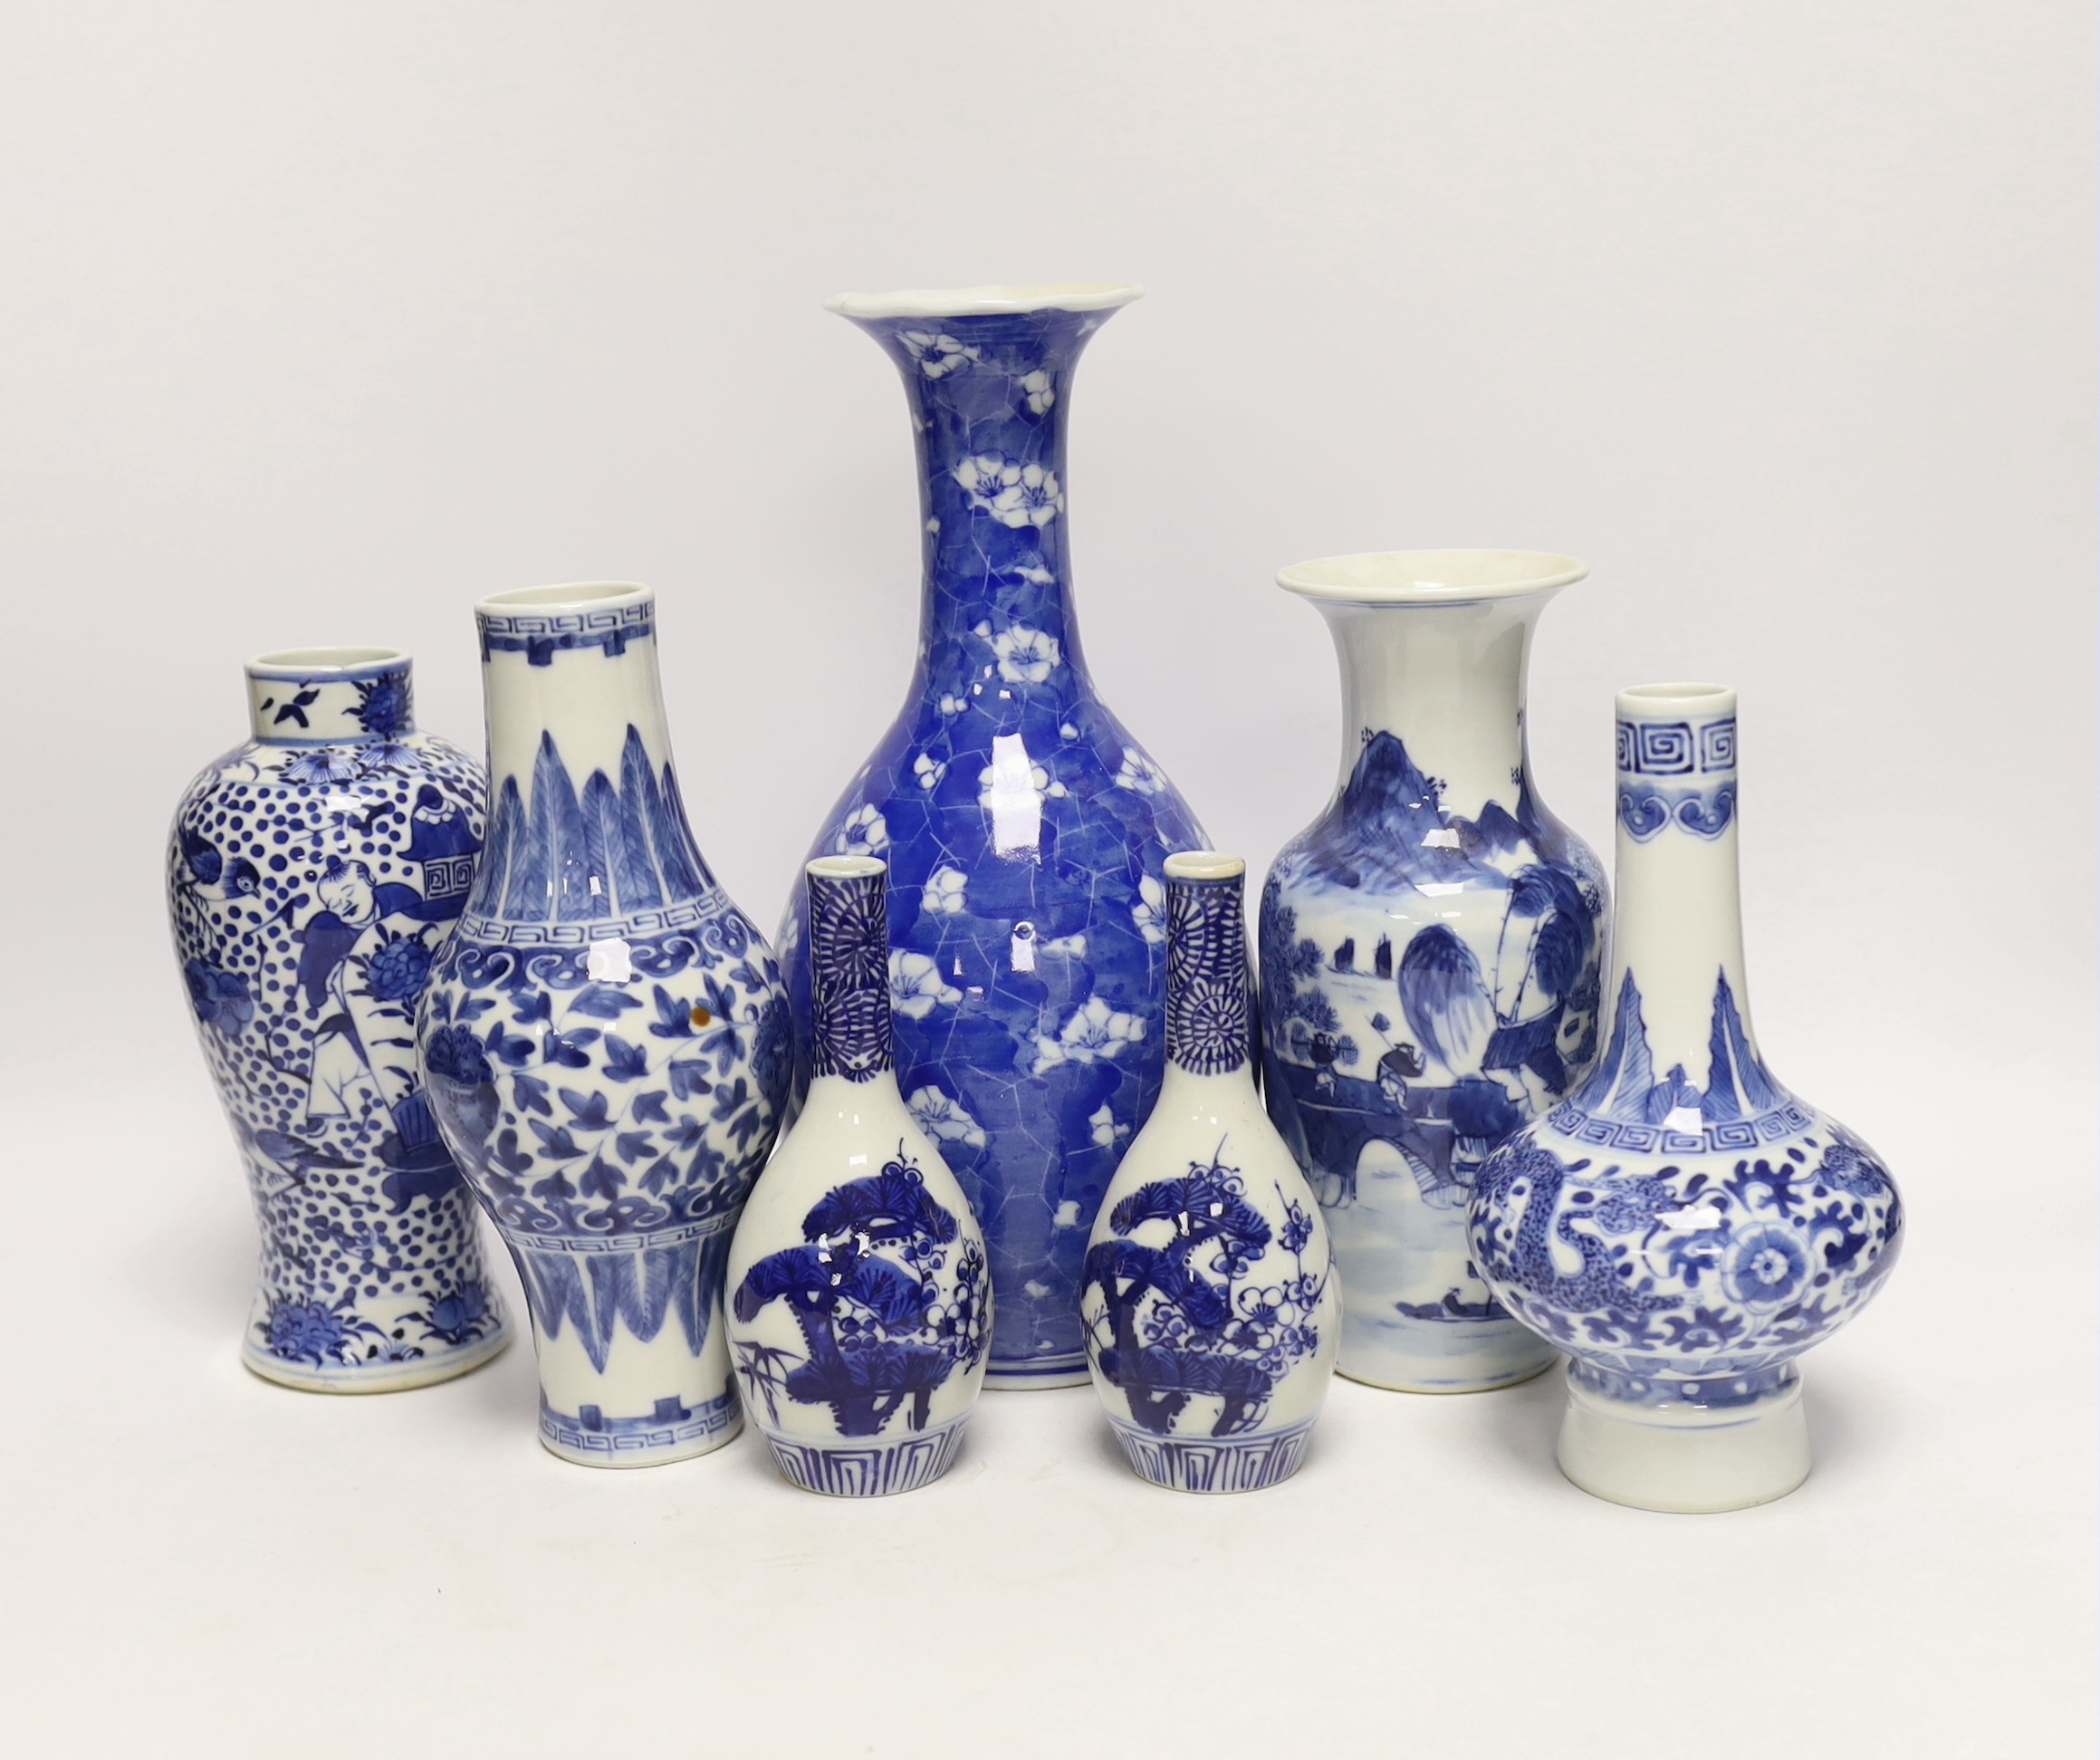 Seven Chinese or Japanese blue and white vases, late 19th/early 20th century, largest 27cm high